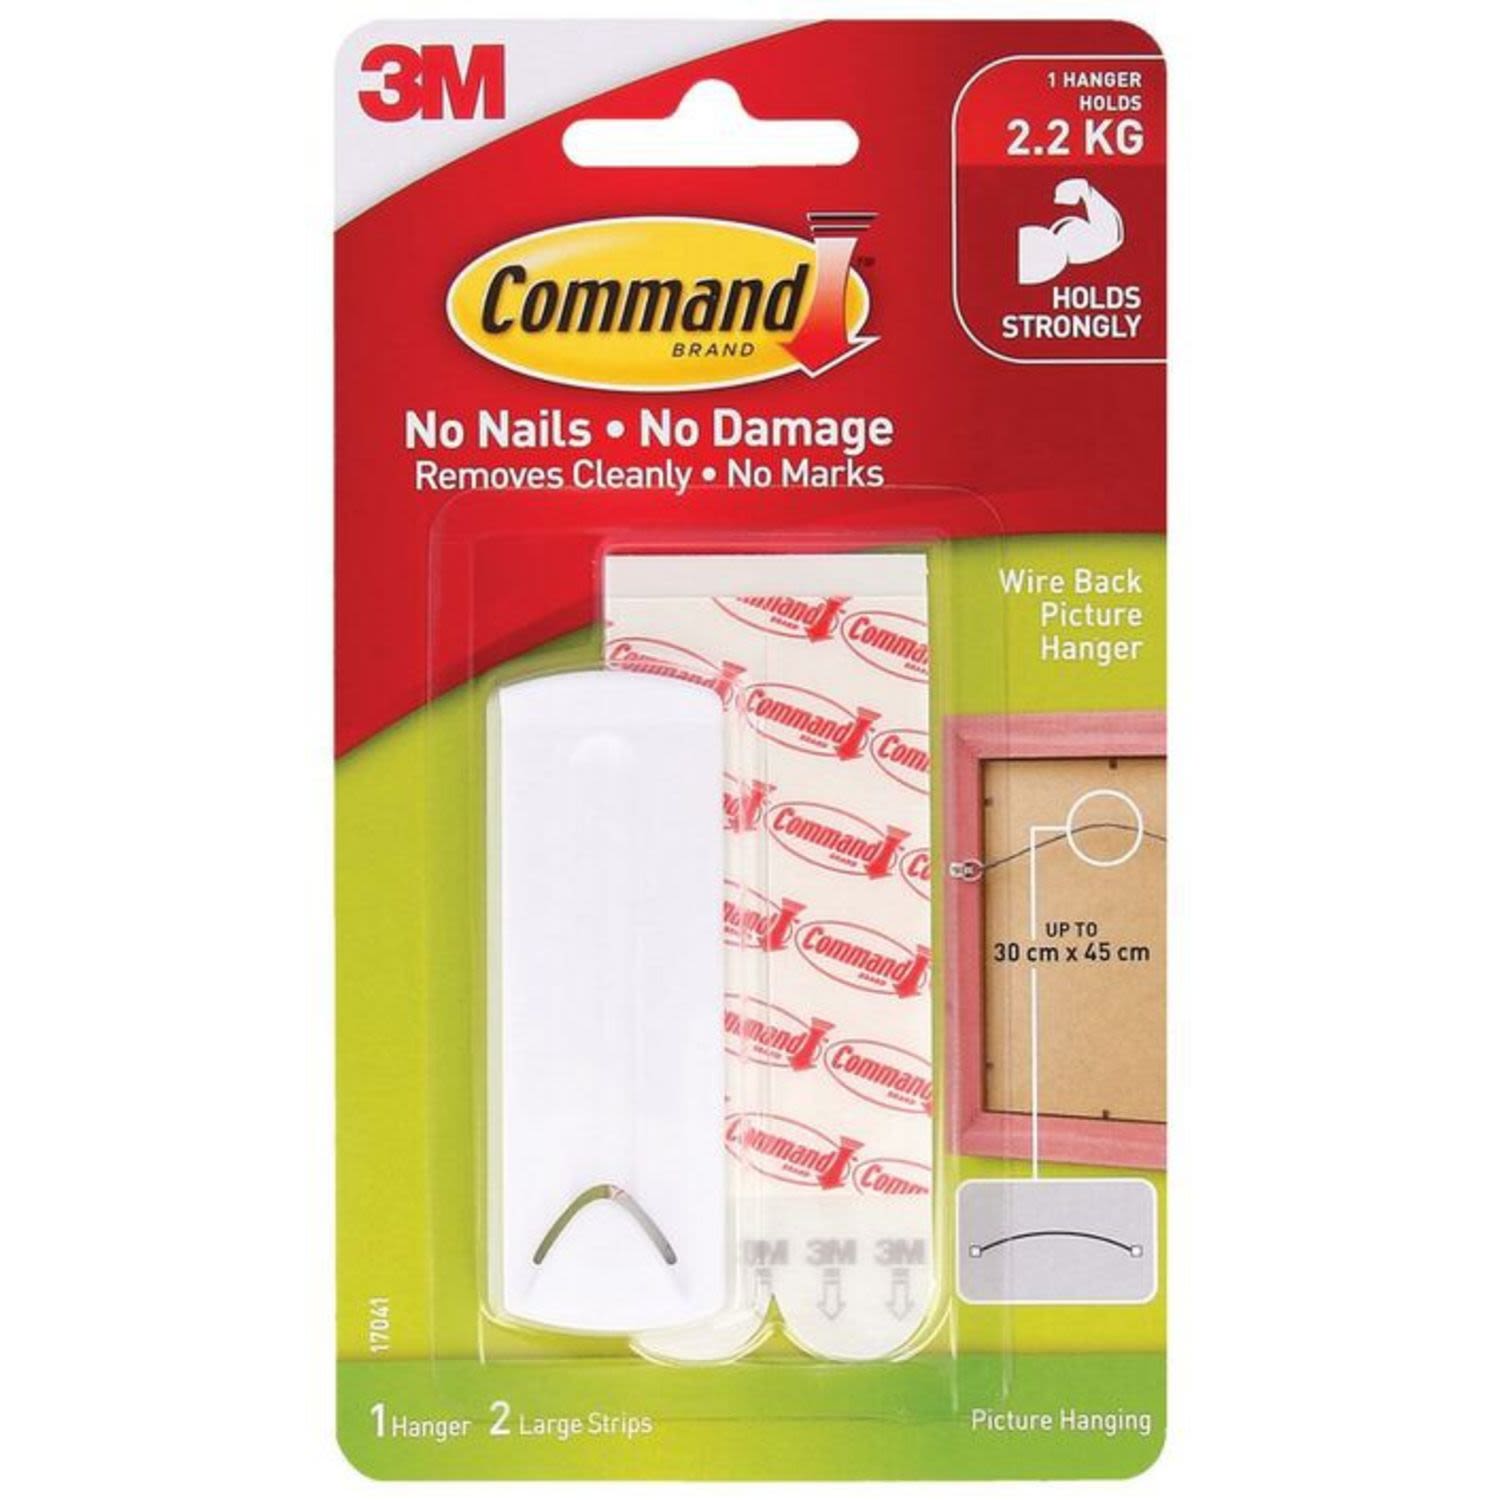 3M Command Wire Backed Picture Hanger White, 1 Each